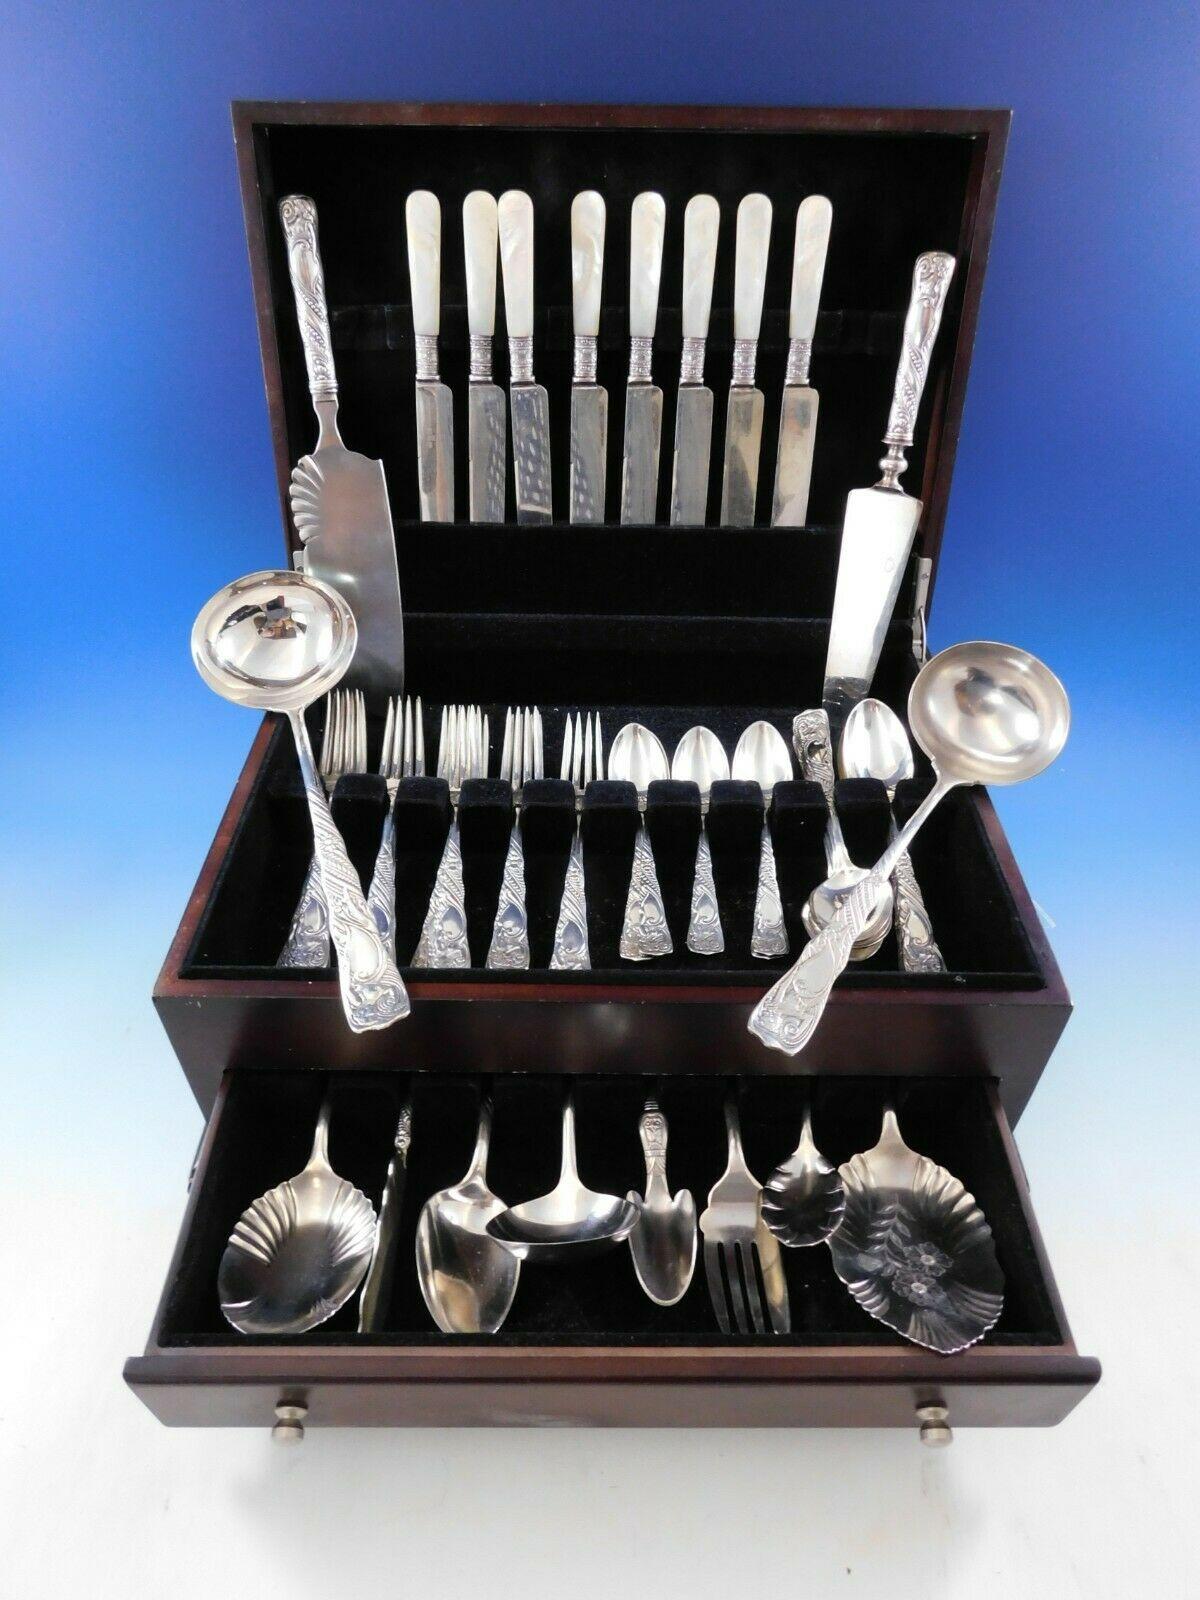 Outstanding siren by International/Rogers Bros, circa 1891, silver plated flatware set, 44 pieces plus 8 mother of pearl handle knives. This figural pattern features a woman with flowing hair. In Greek mythology, Sirens were mermaid creatures who